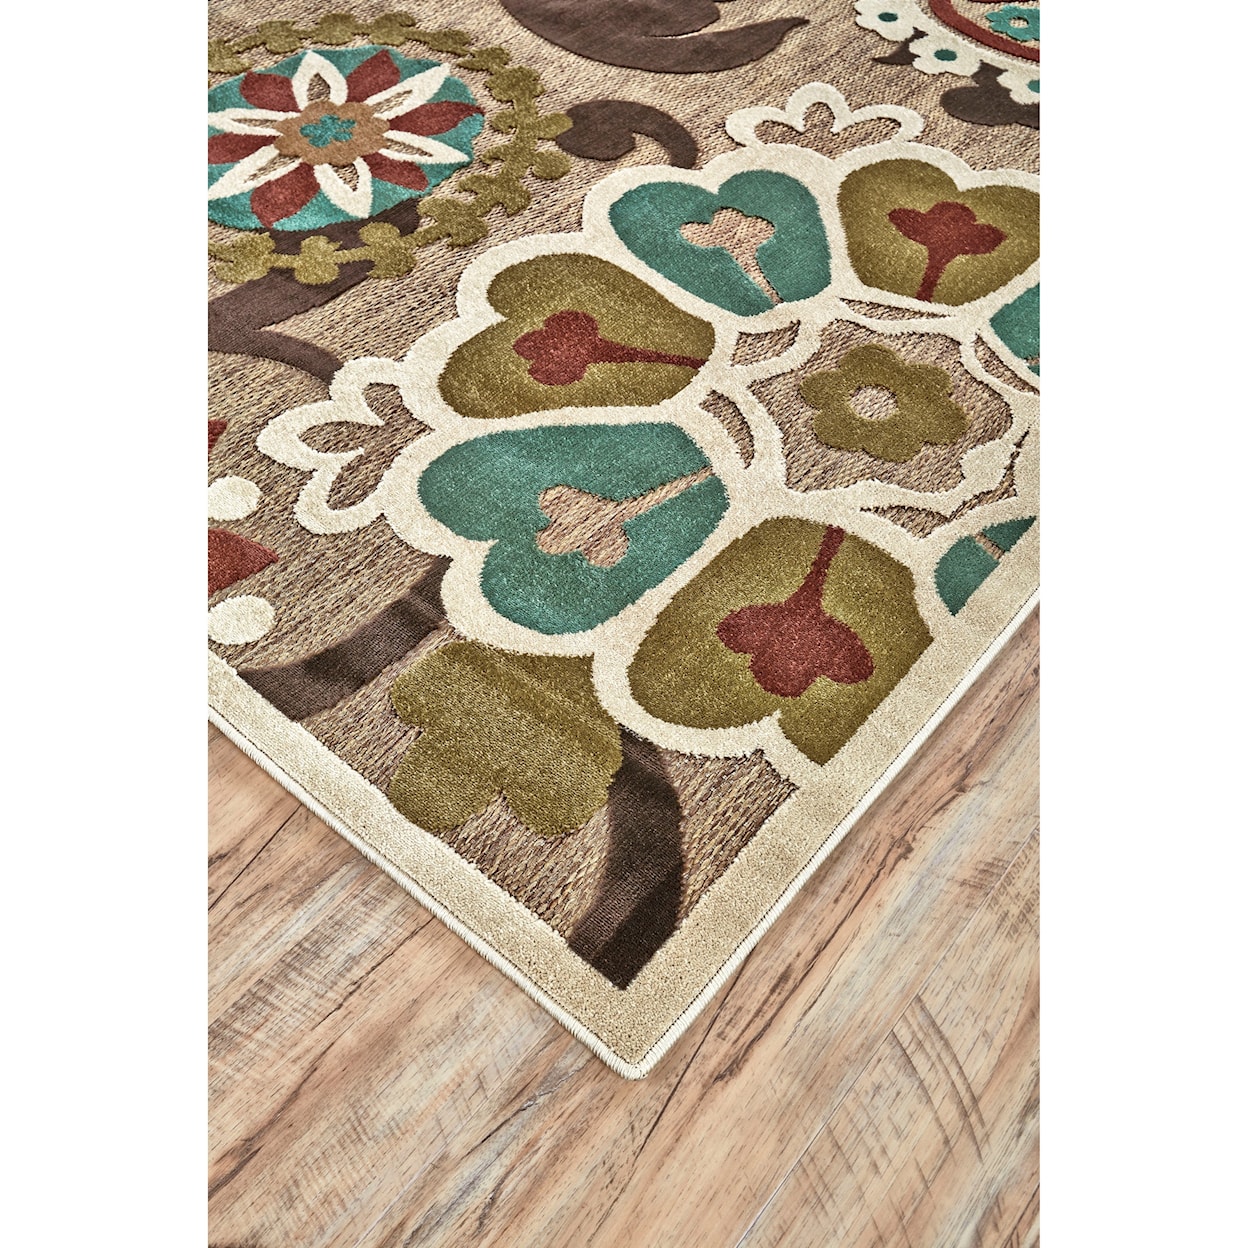 Feizy Rugs Lucka Tan/Brown 2'-1" X 4' Area Rug